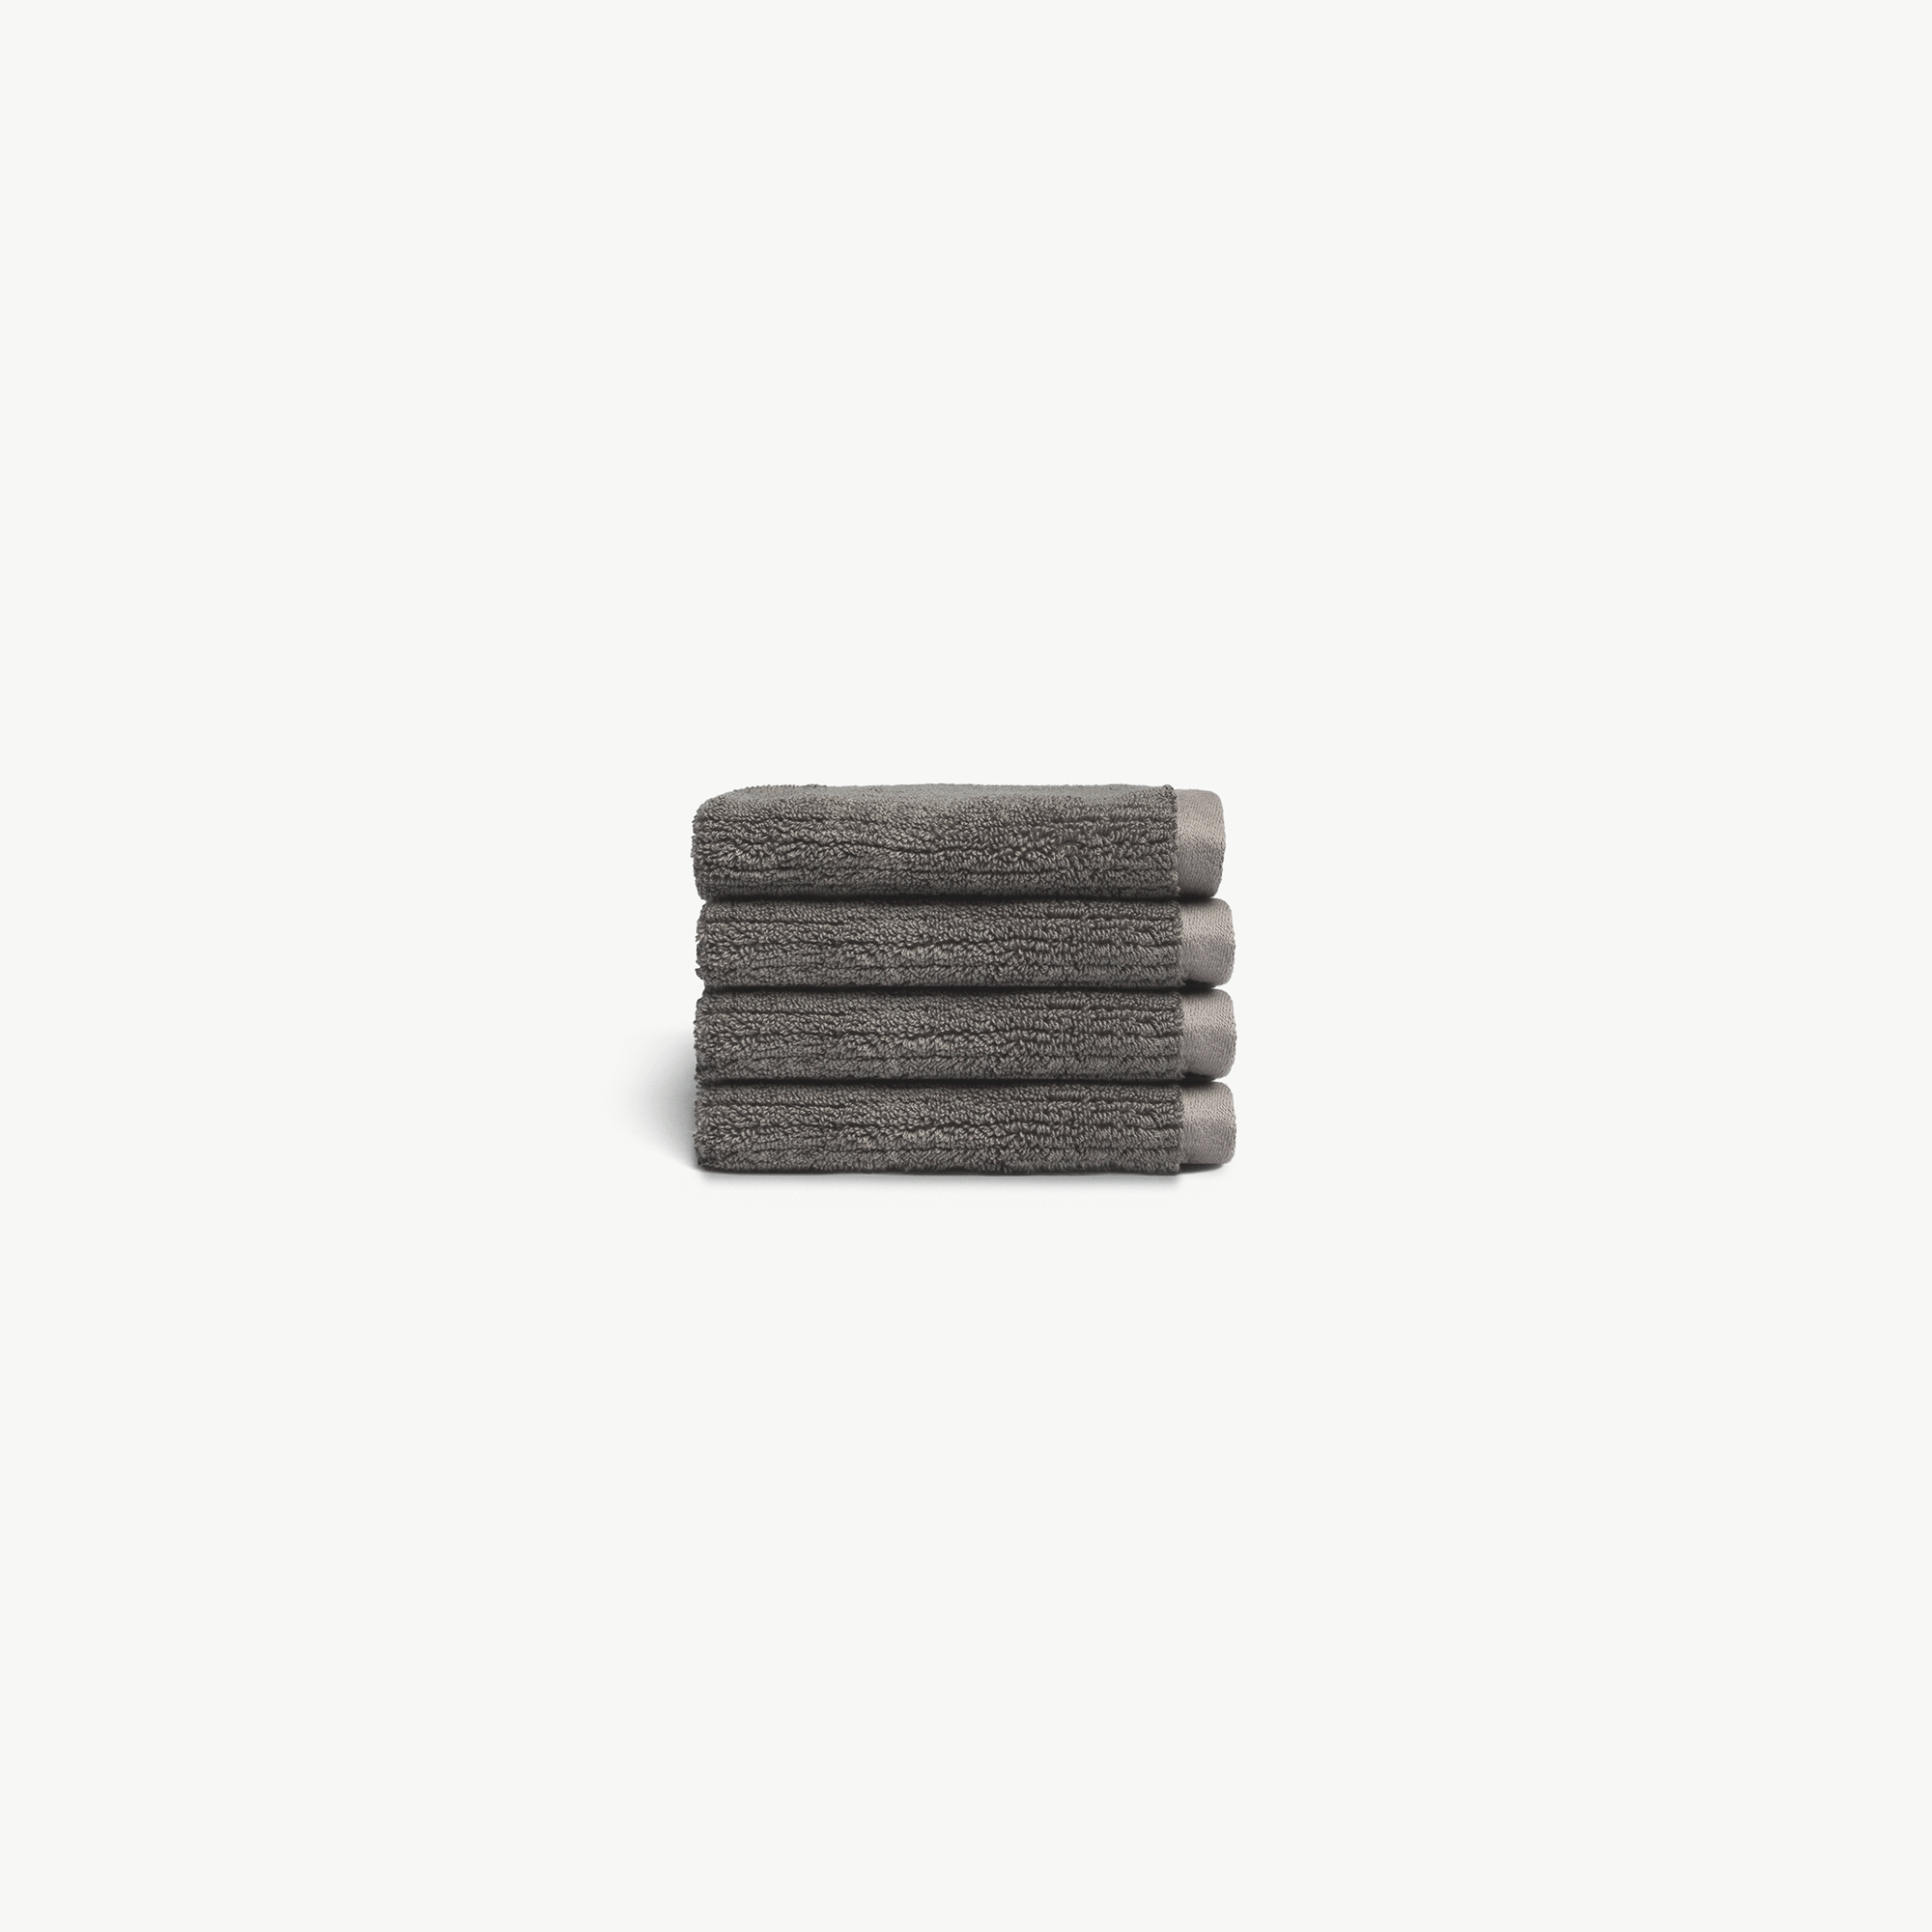 Ribbed Terry Wash Cloths in the color Charcoal. Photo of product taken with white background. |Color:Charcoal